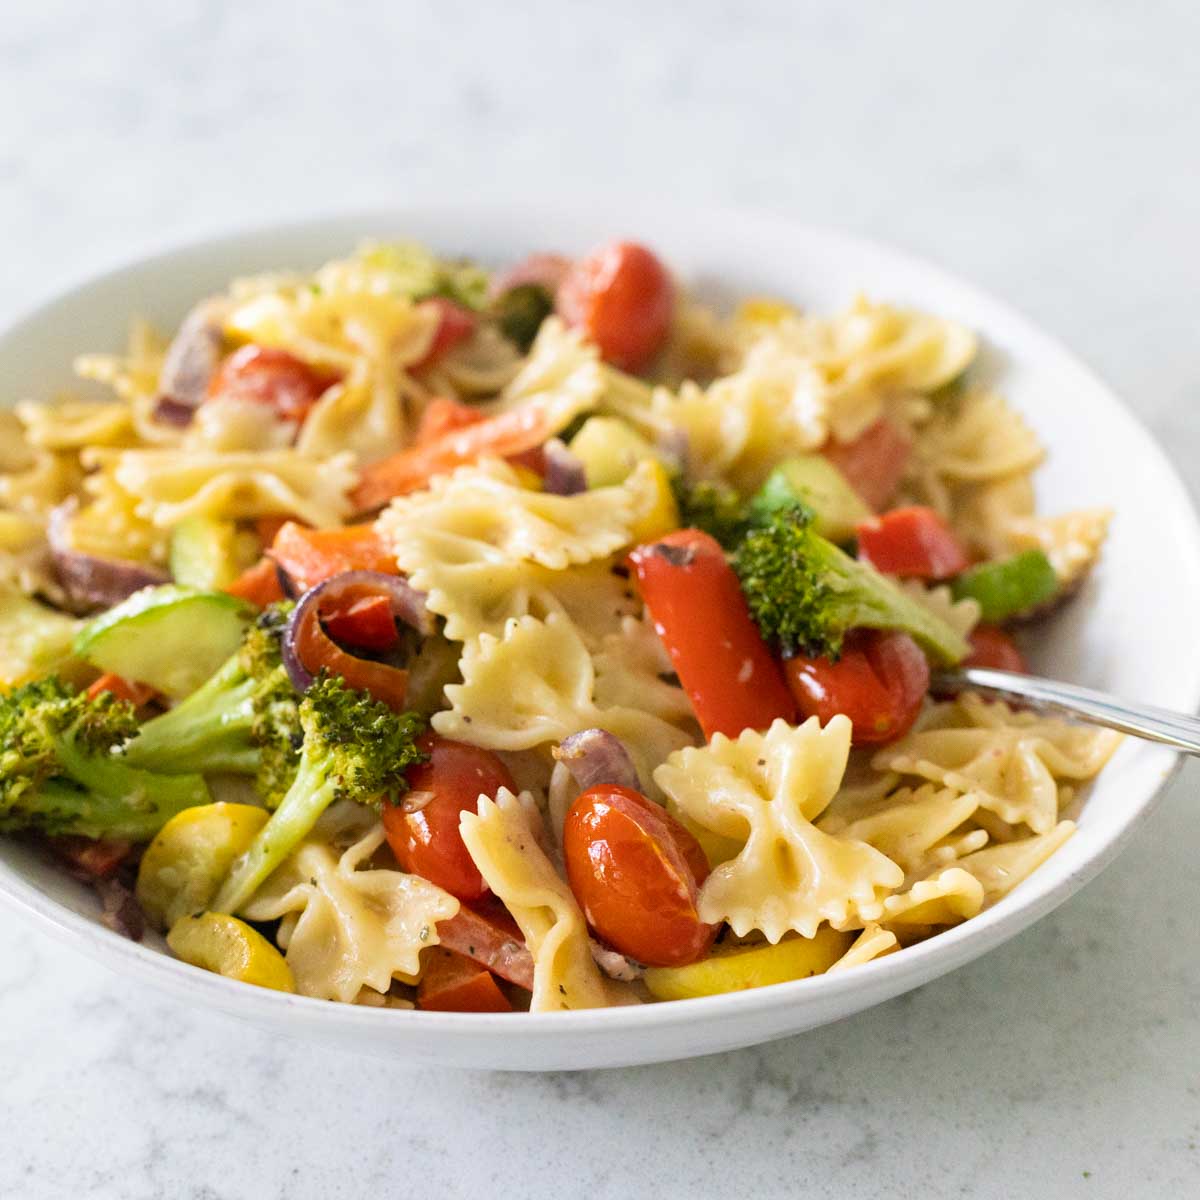 The vegetables have been tossed with farfalle pasta and are served in a white bowl.